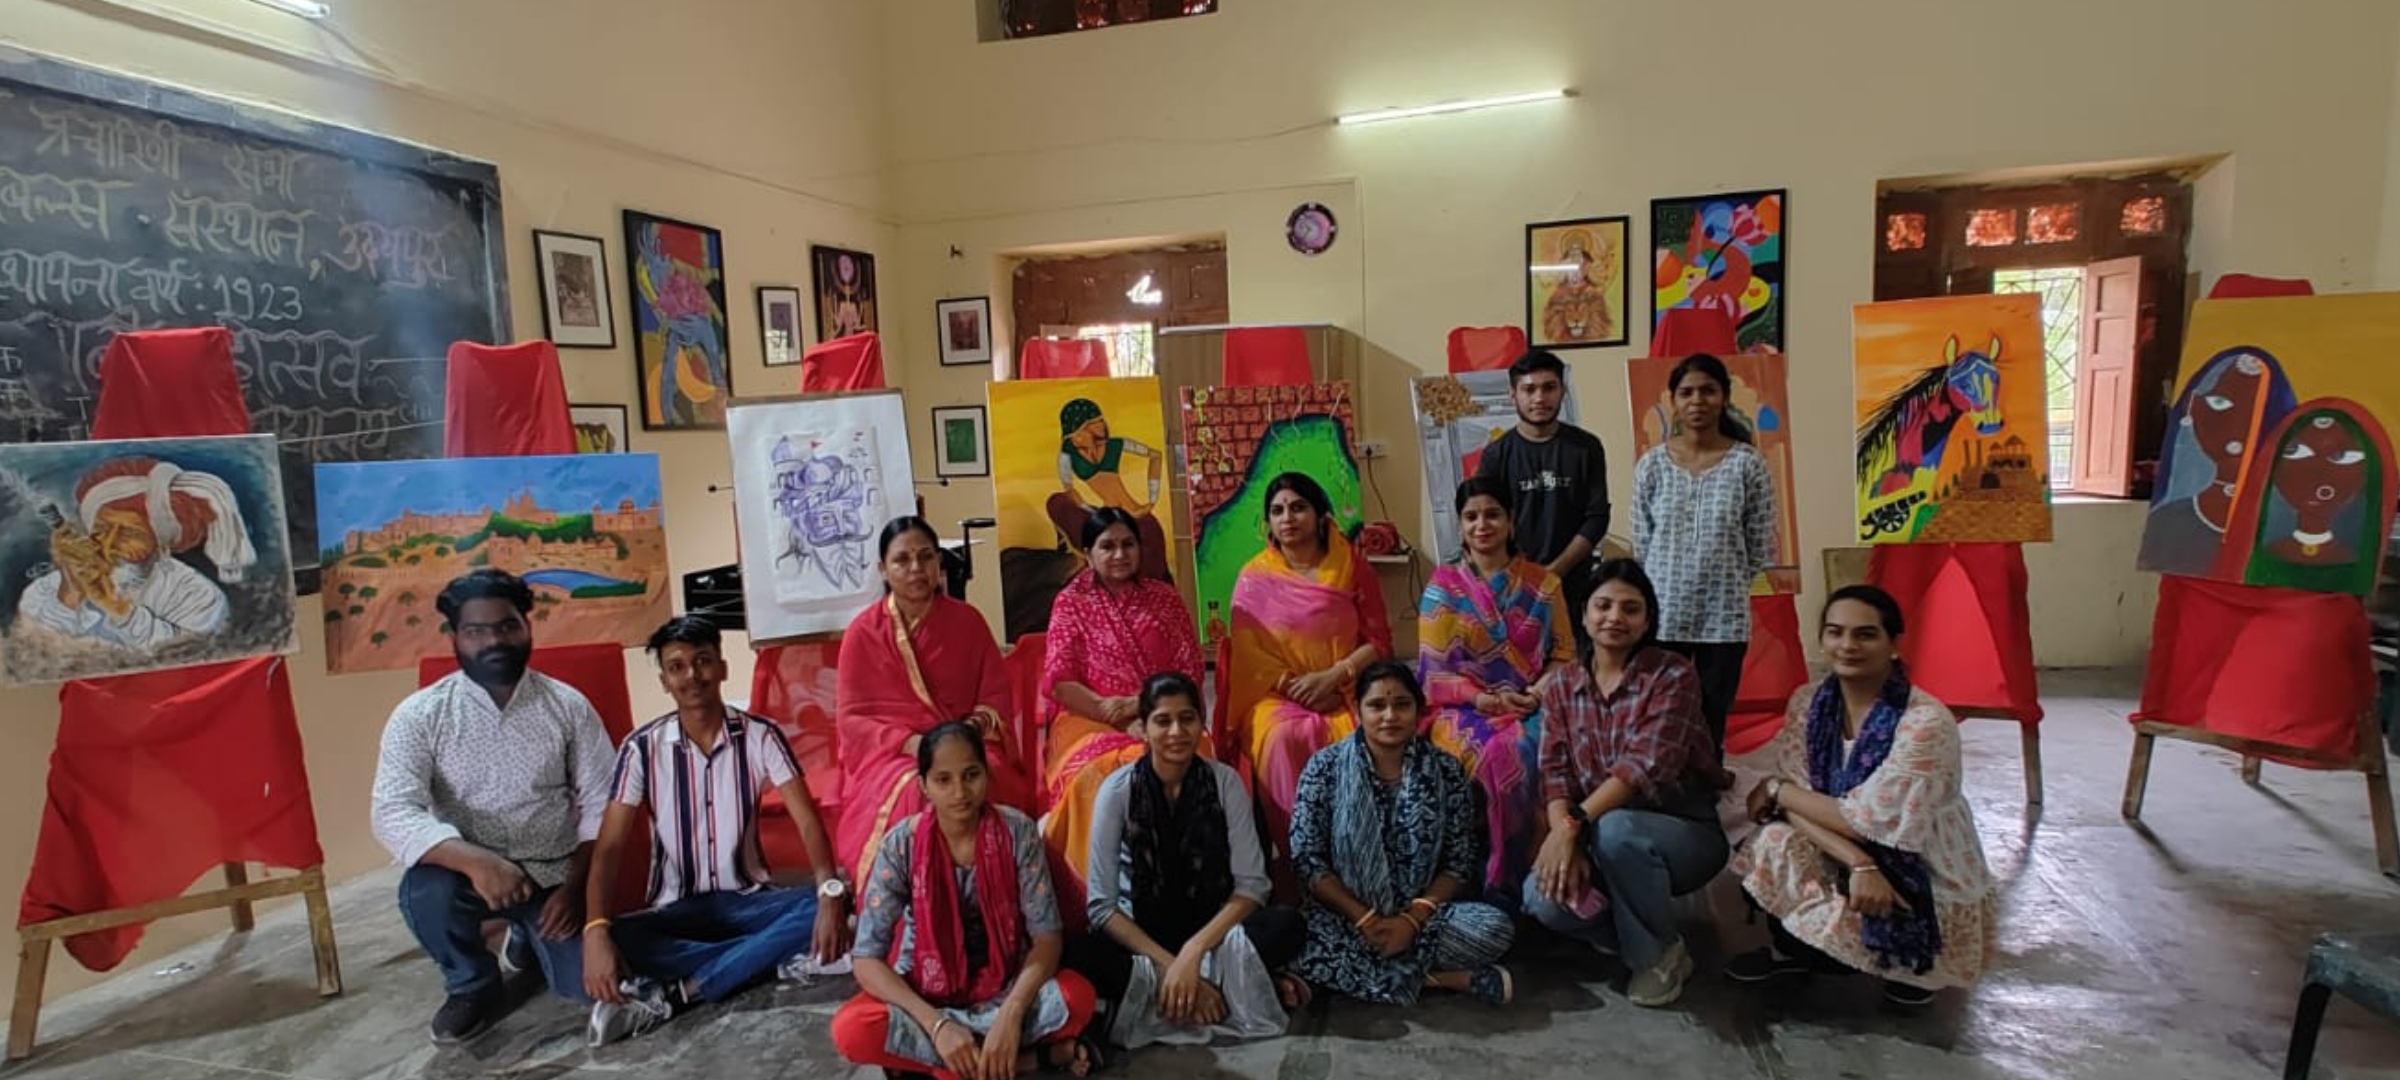 Rajasthan's 75th Anniversary Celebrated: Art Exhibition at BN PG College